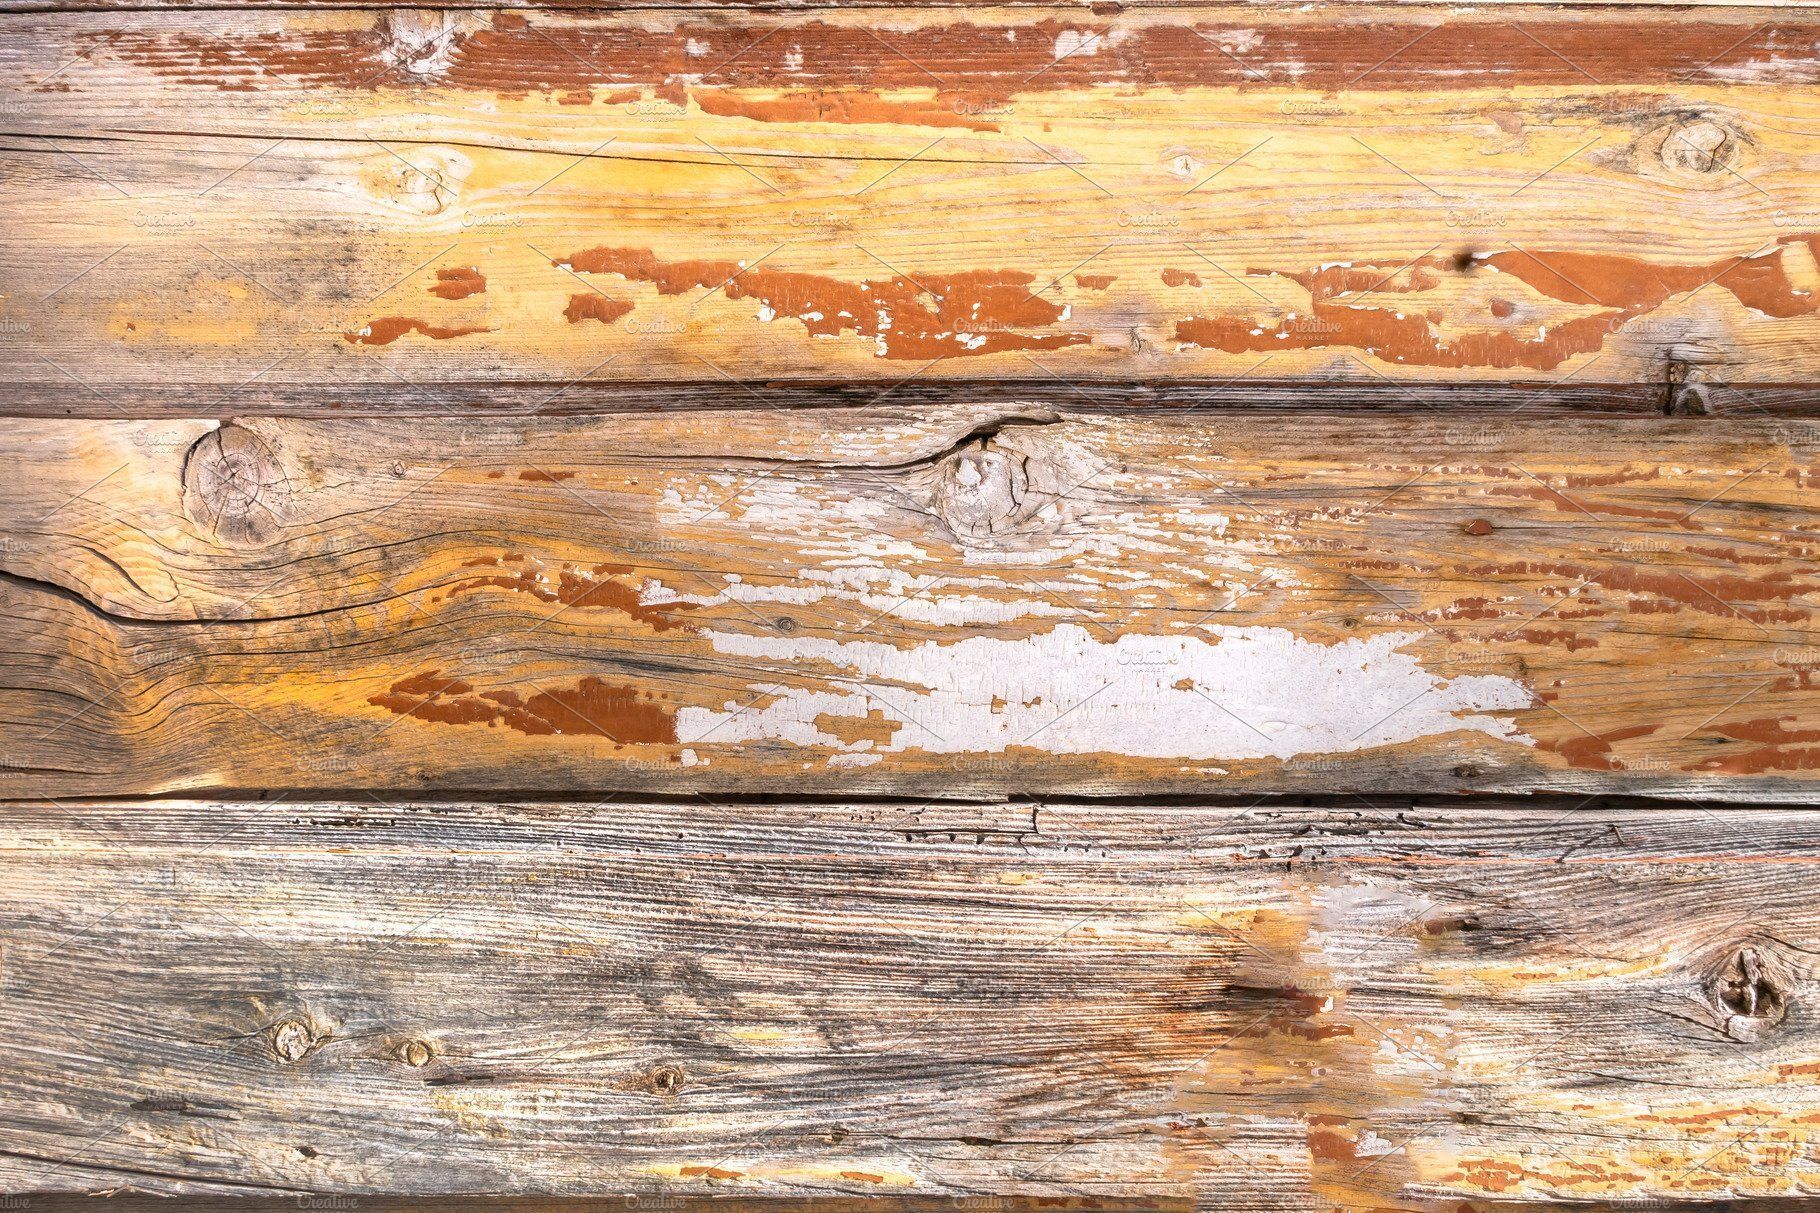 Background wood. Abstract photography, Wood background, Vintage wood